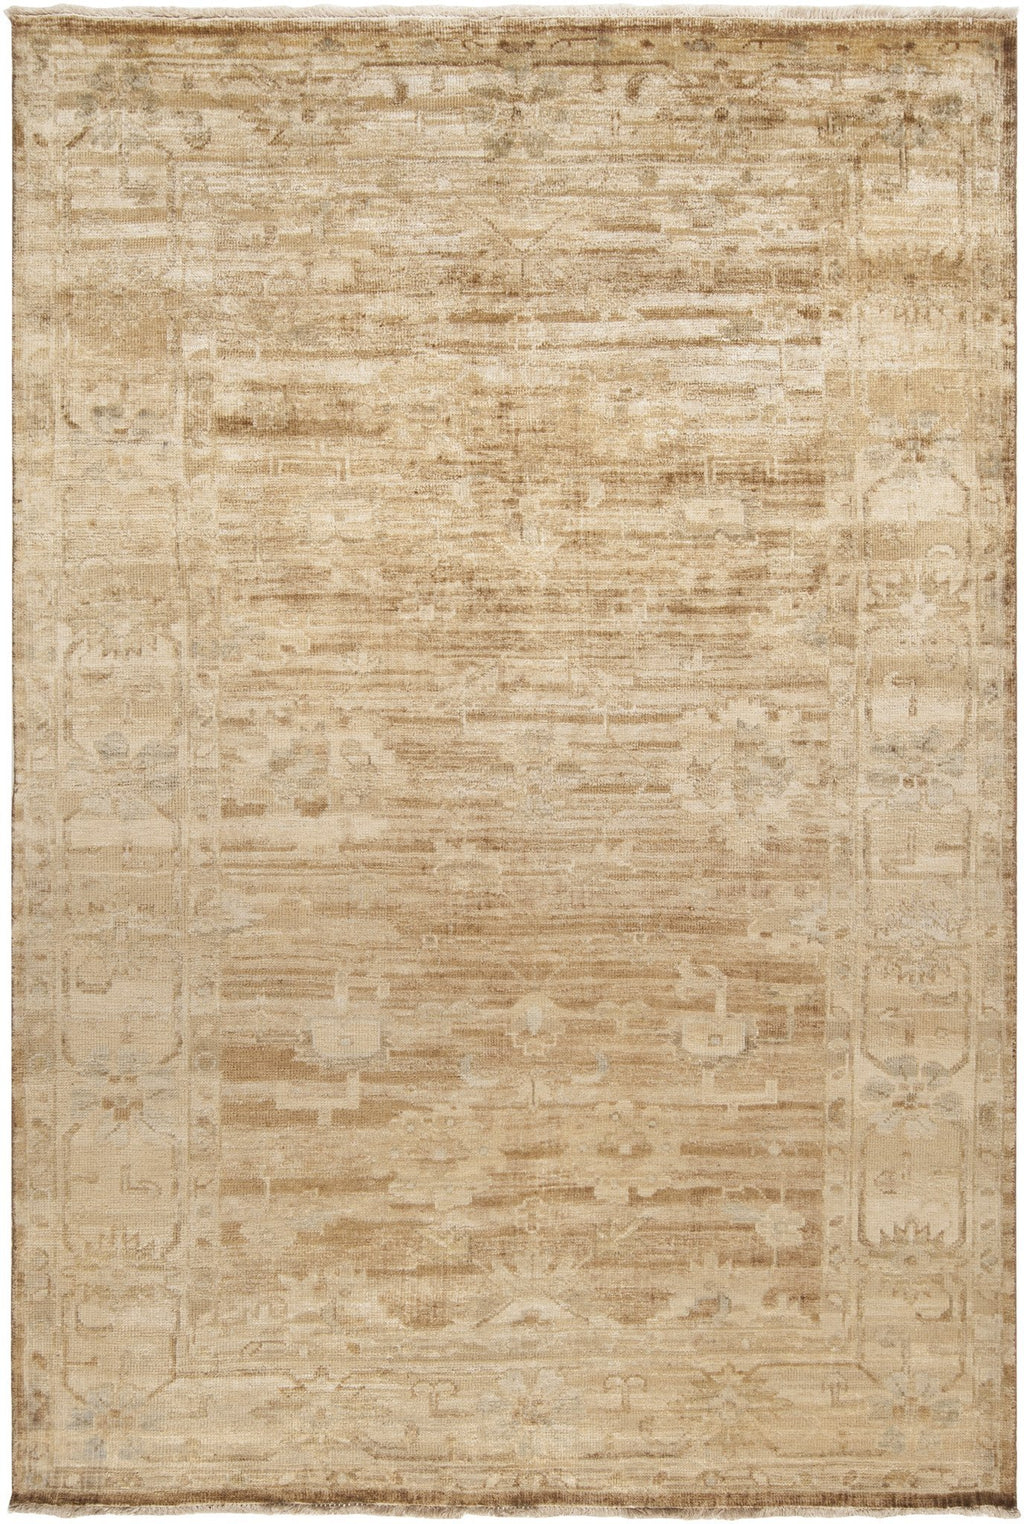 Hillcrest Rug in Beige & Taupe